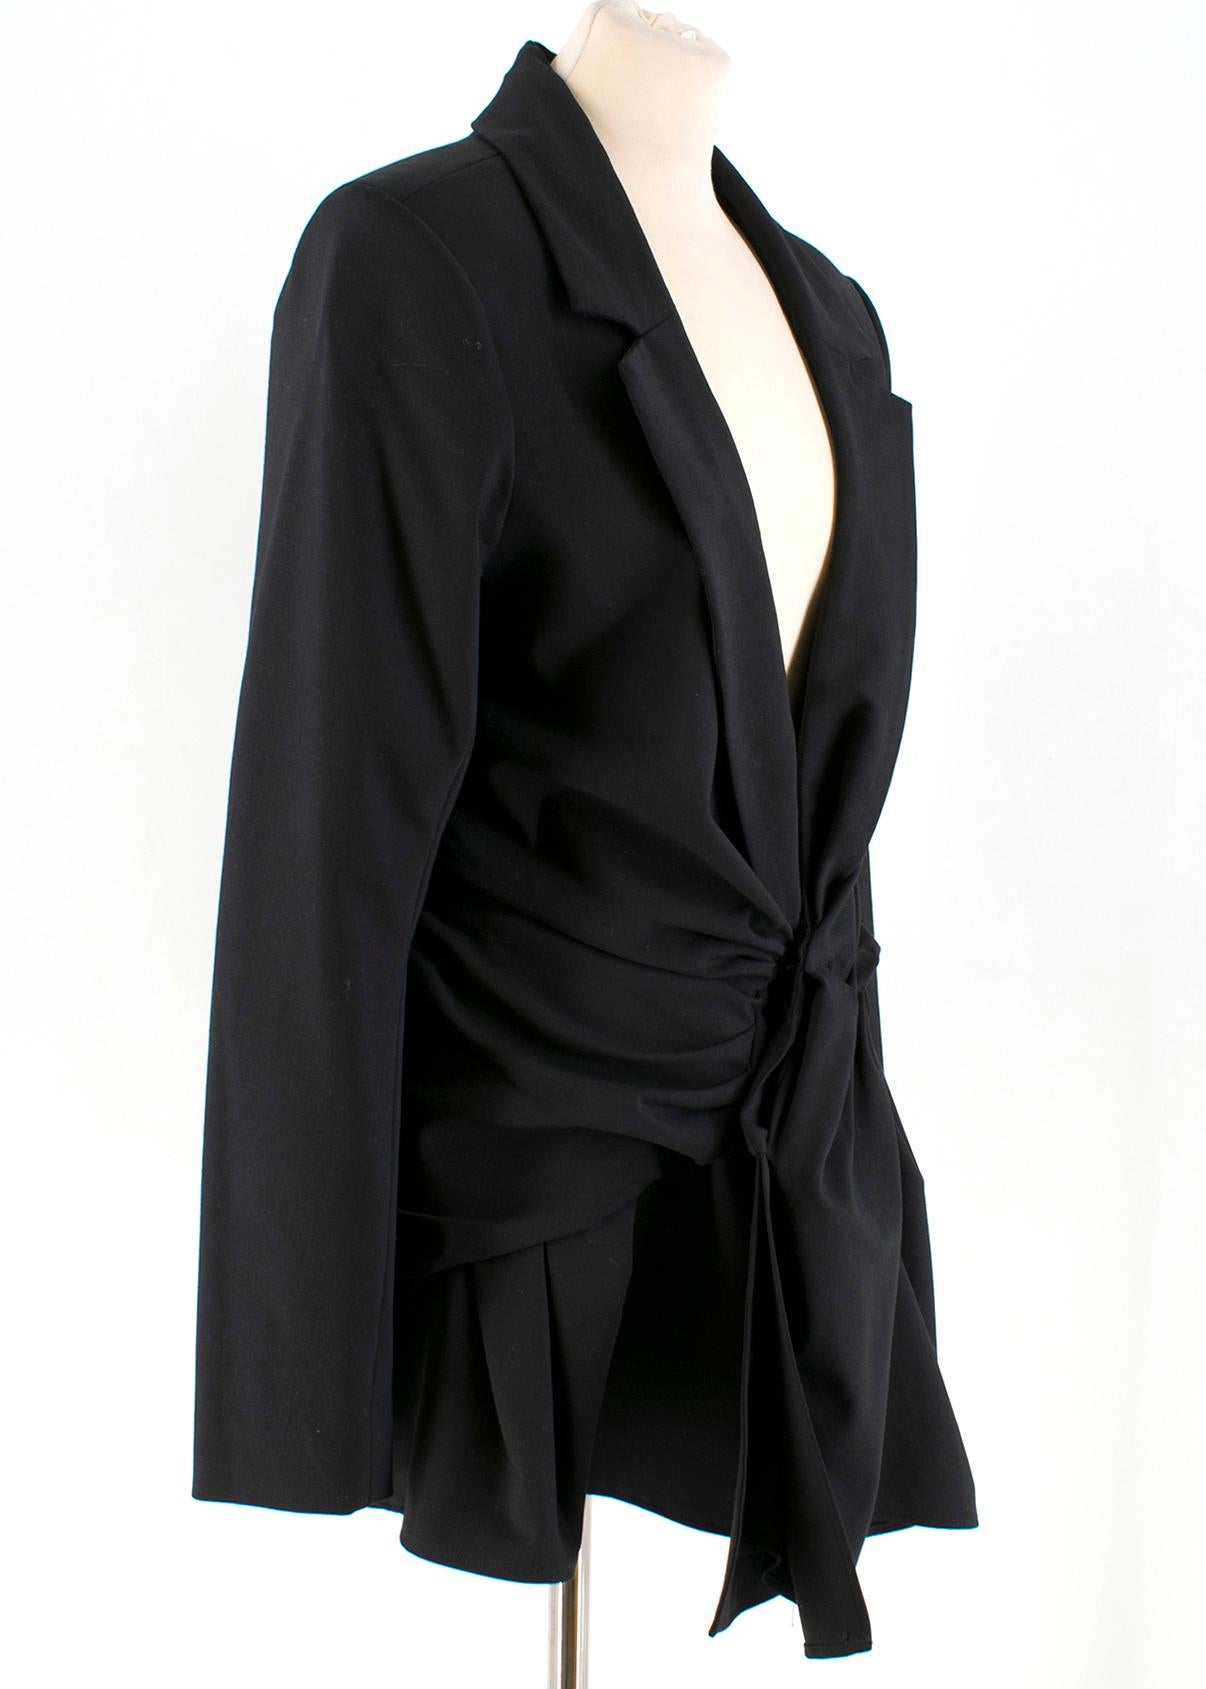 Jacquemus LA Bomba Blazer Dress

- Black, mid-weight, long sleeve wool-blend blazer dress
- Plunging v-neck
- Padded shoulders, notch lapels
- Ruched fitted skirt
- Centre-front button fastening
- Decorative chest welt pocket
- Ruffled trimmed hem
-